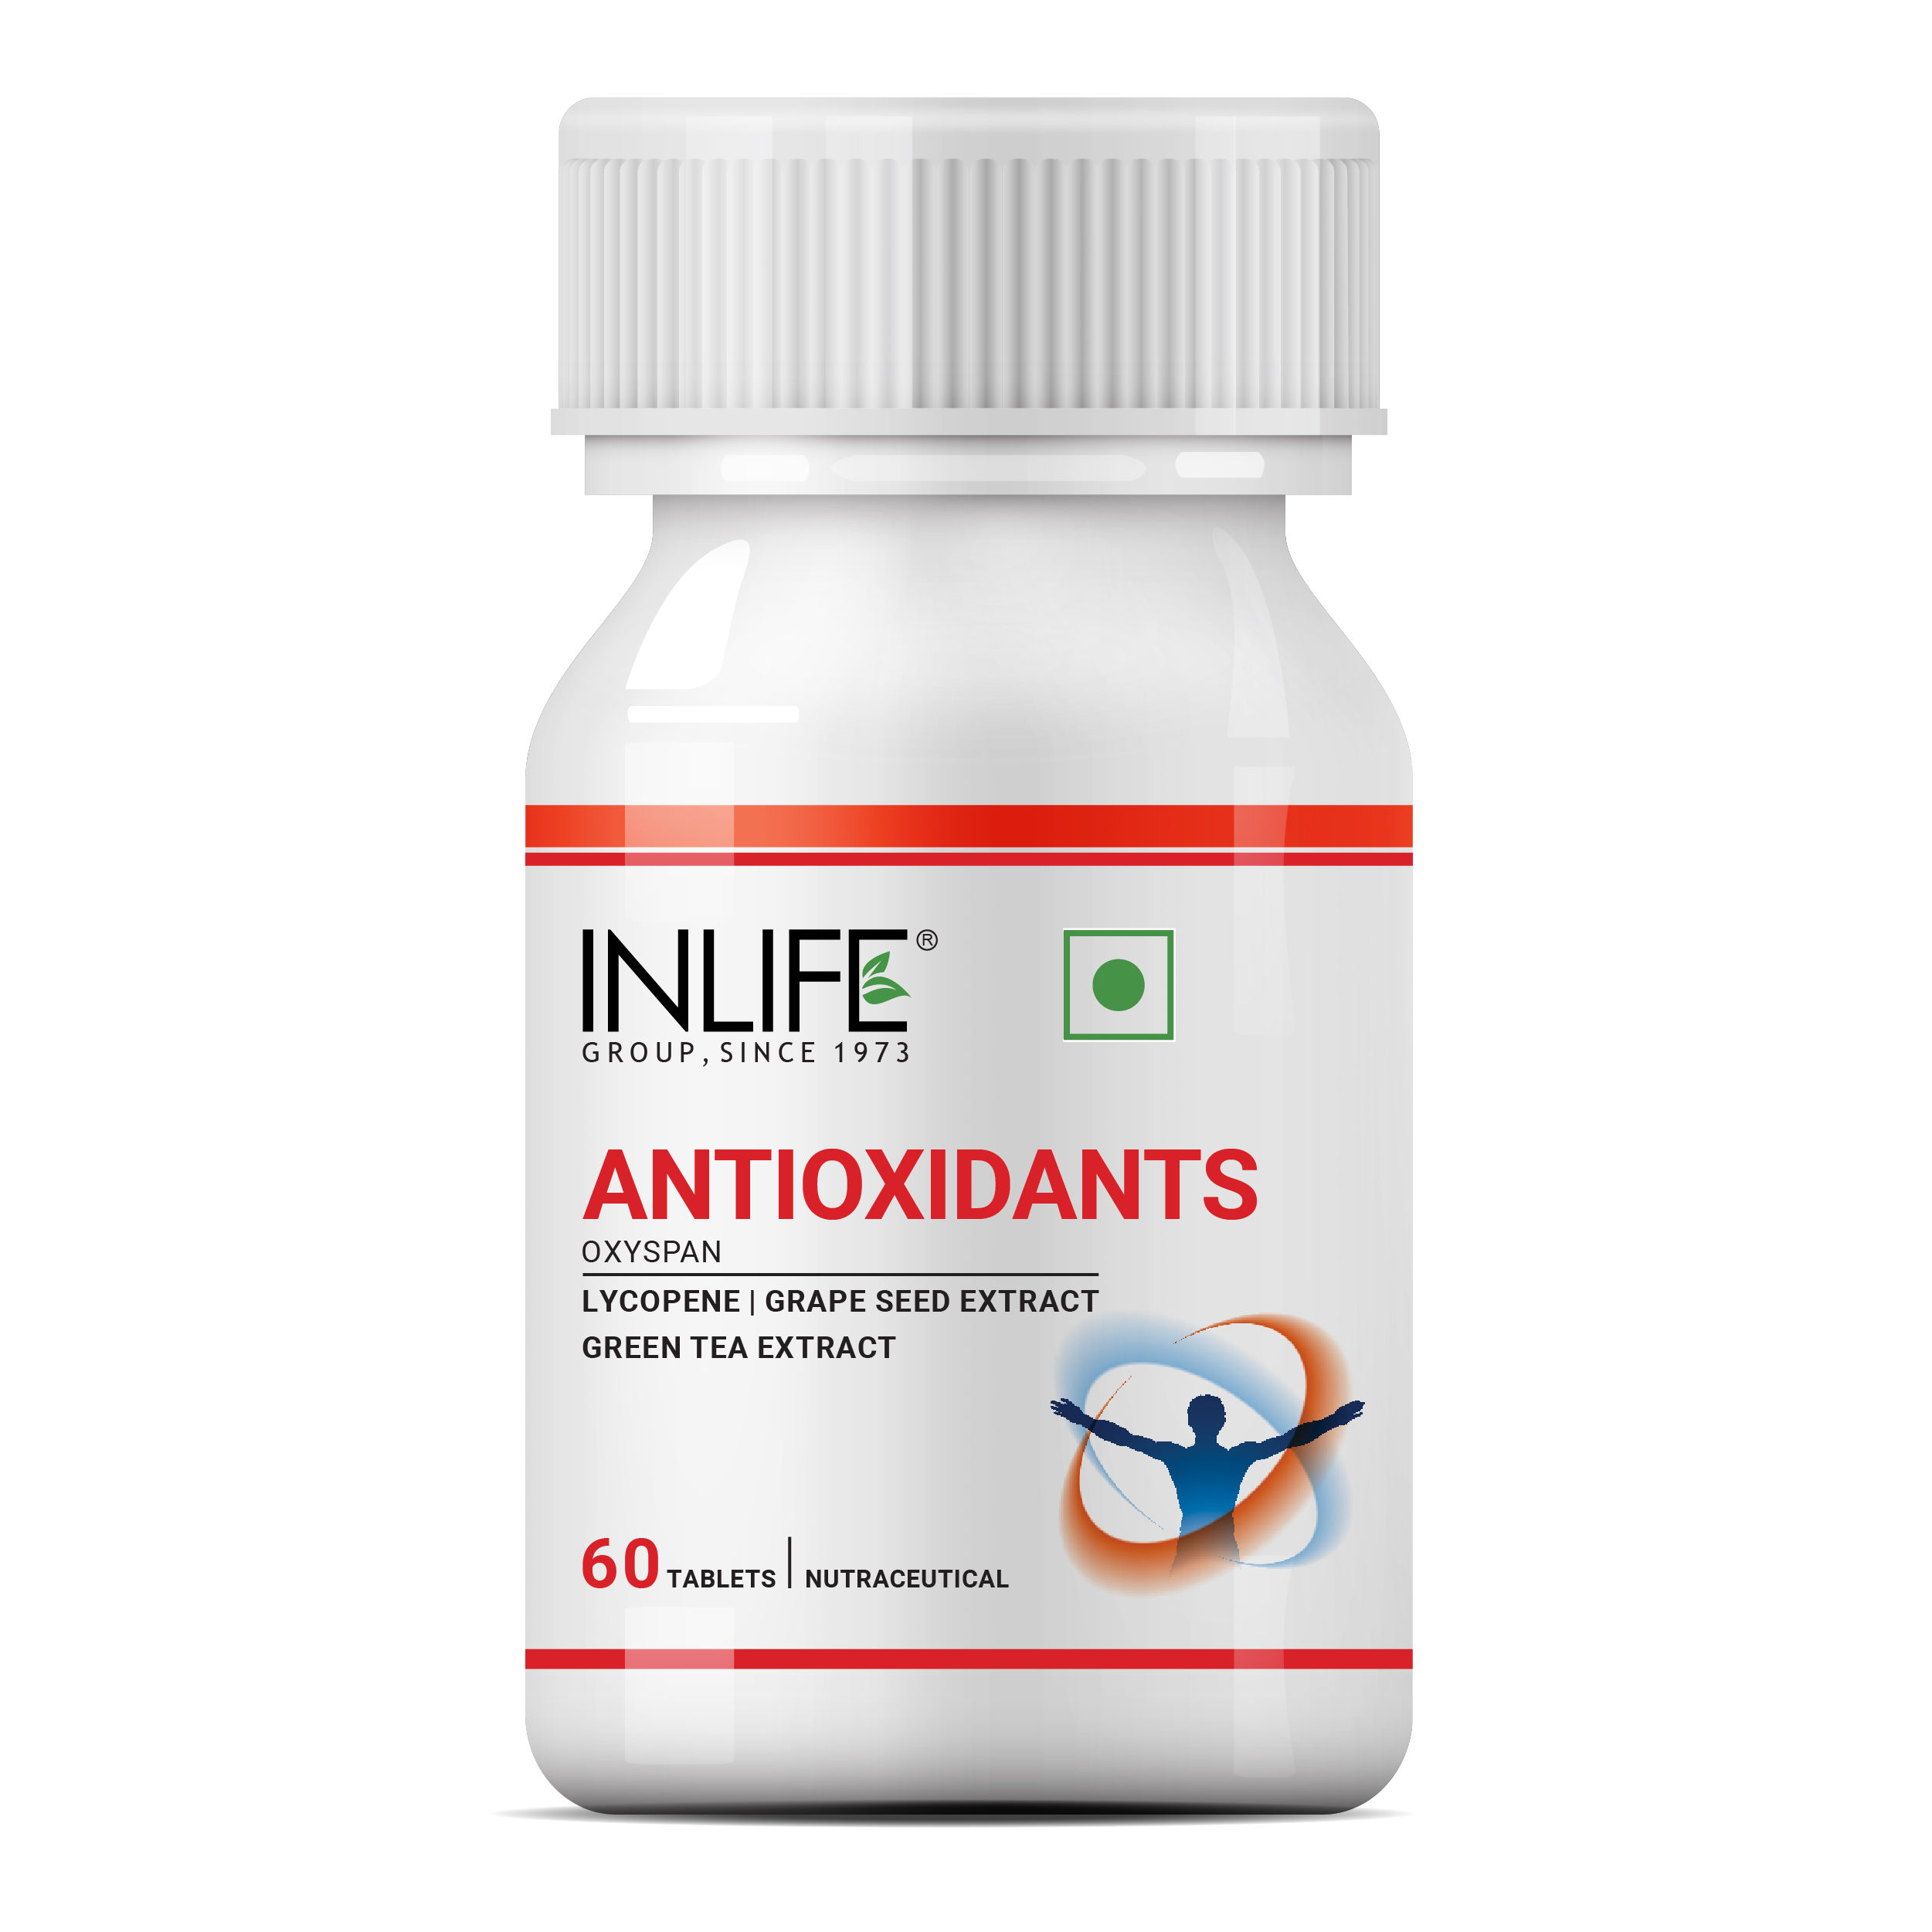 INLIFE Antioxidants with Lycopene- Grape Seed And Green Tea Extract (60 Tablets)